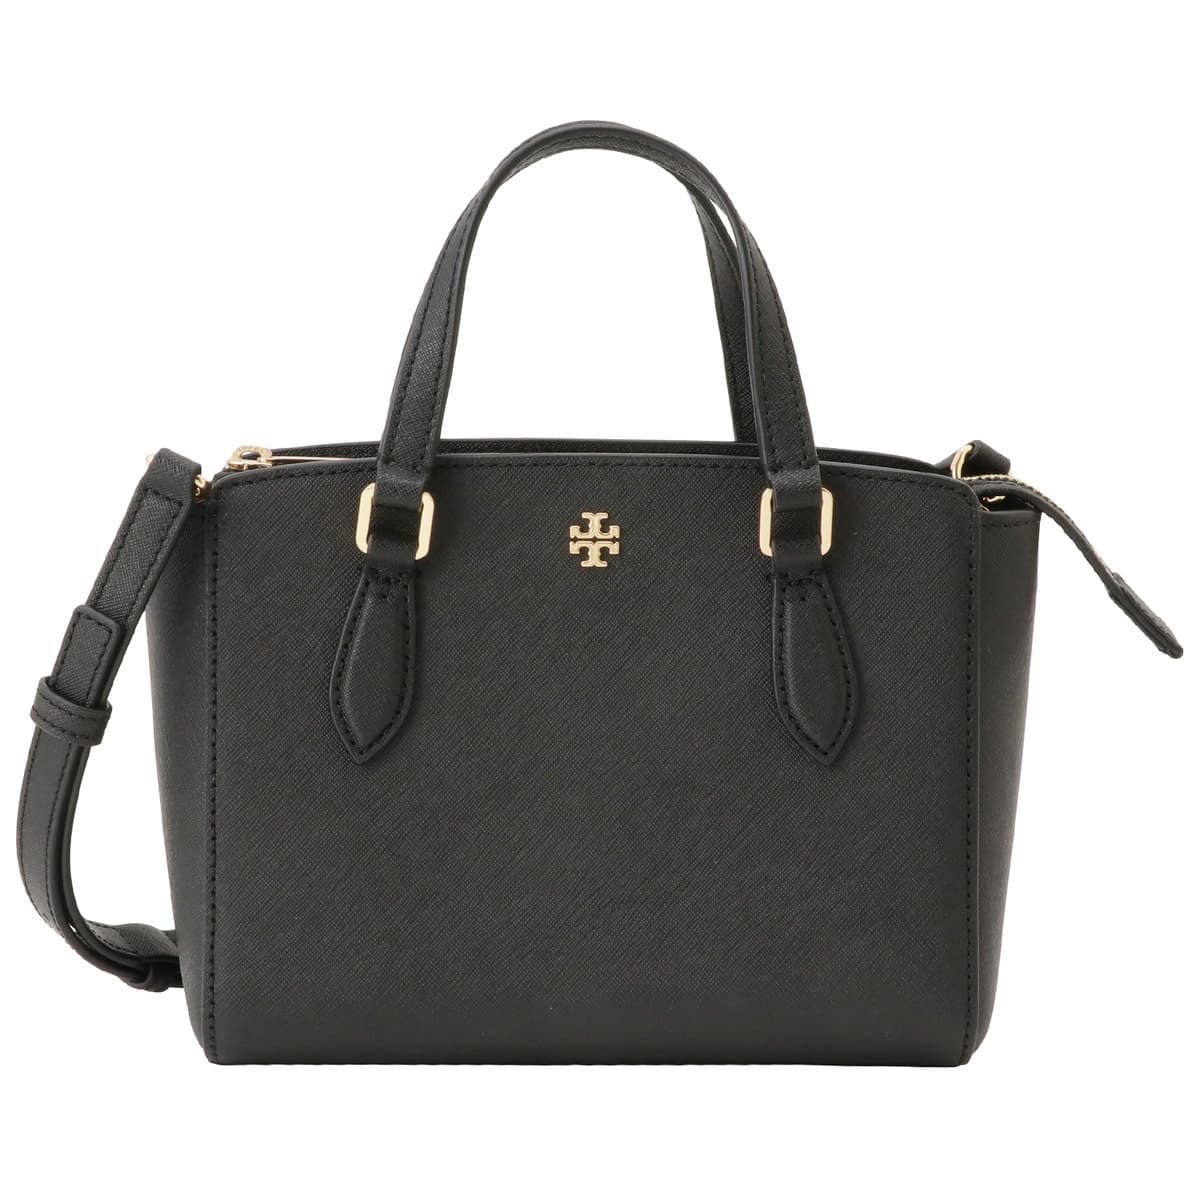 Tory Burch トリーバーチ バッグ 64189-001 トリーバーチ･アウトレット バッグ Tory Burch ショルダーバッグ トートバッグ EMERSON MINI TOP ZIP TOTE TORYBURCH OUTLET 64189-001